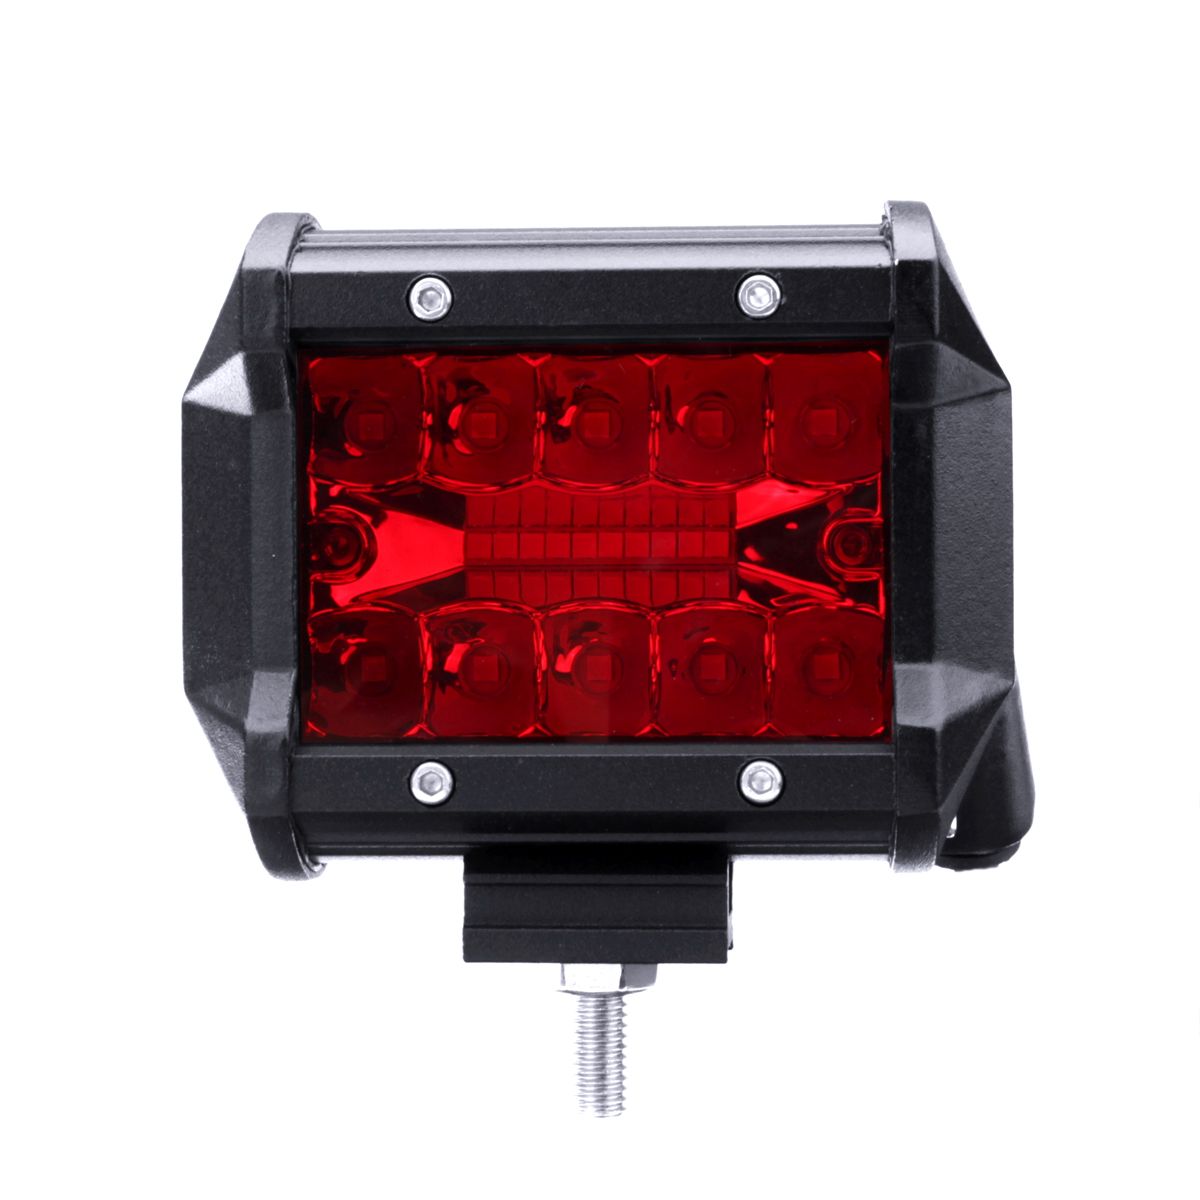 Pair-Red-4Inch-Tri-Row-60W-20-LED-Work-Light-Bar-Flood-Spot-Combo-Lamp-for-Car-Offroad-SUV-1330812